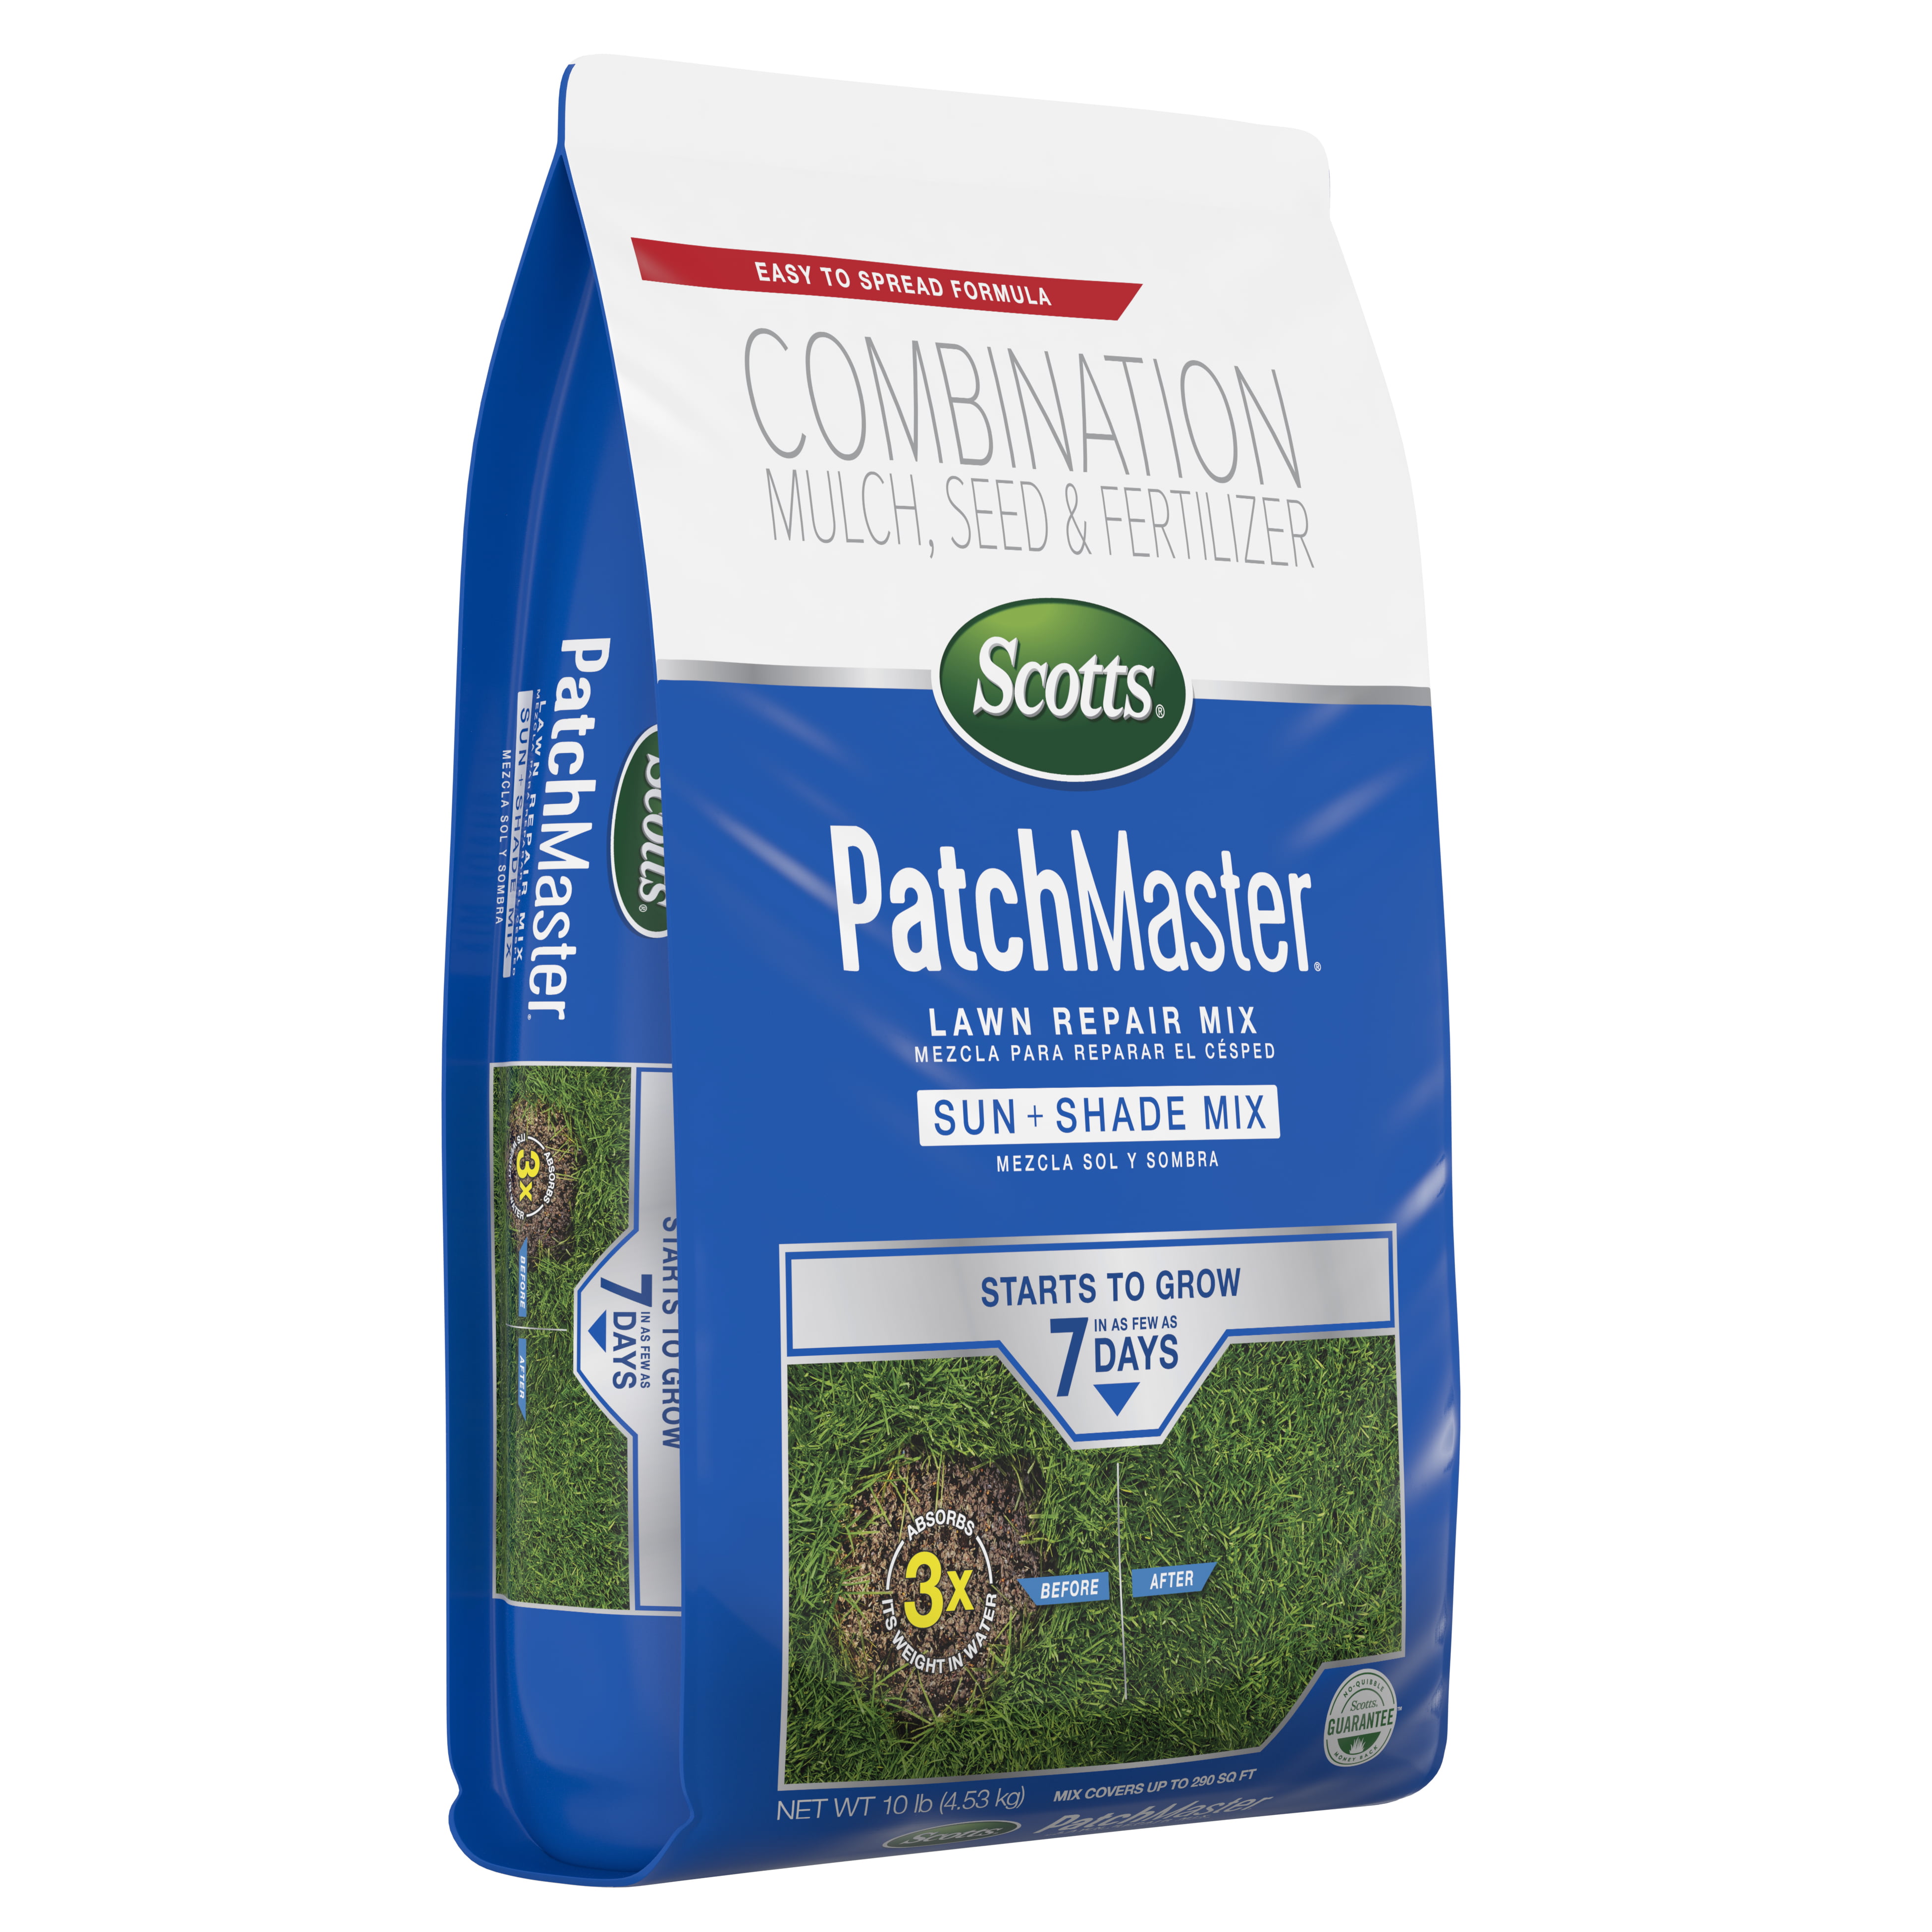 GEOPONICS Scotts PatchMaster Sun and Shade Mix Grass Patch & Repair 